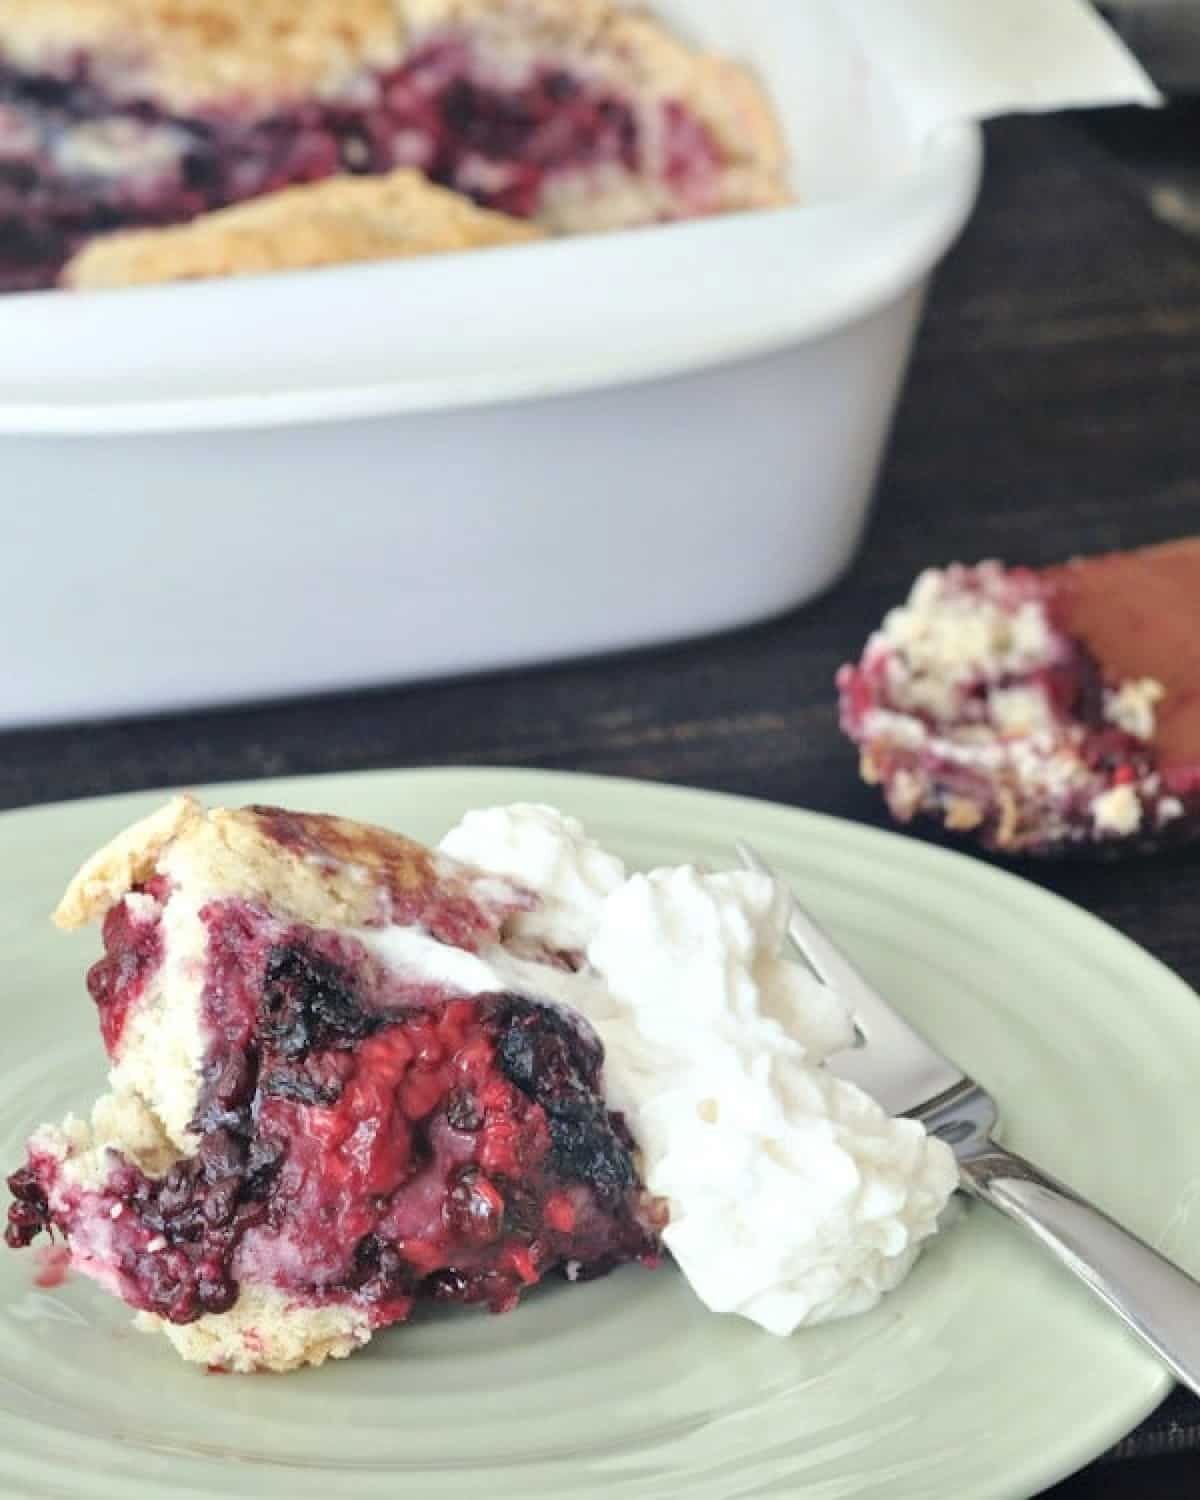 One serving of mixed berry cobbler on a plate, topped with whip cream Full baking dish of cobbler in background.